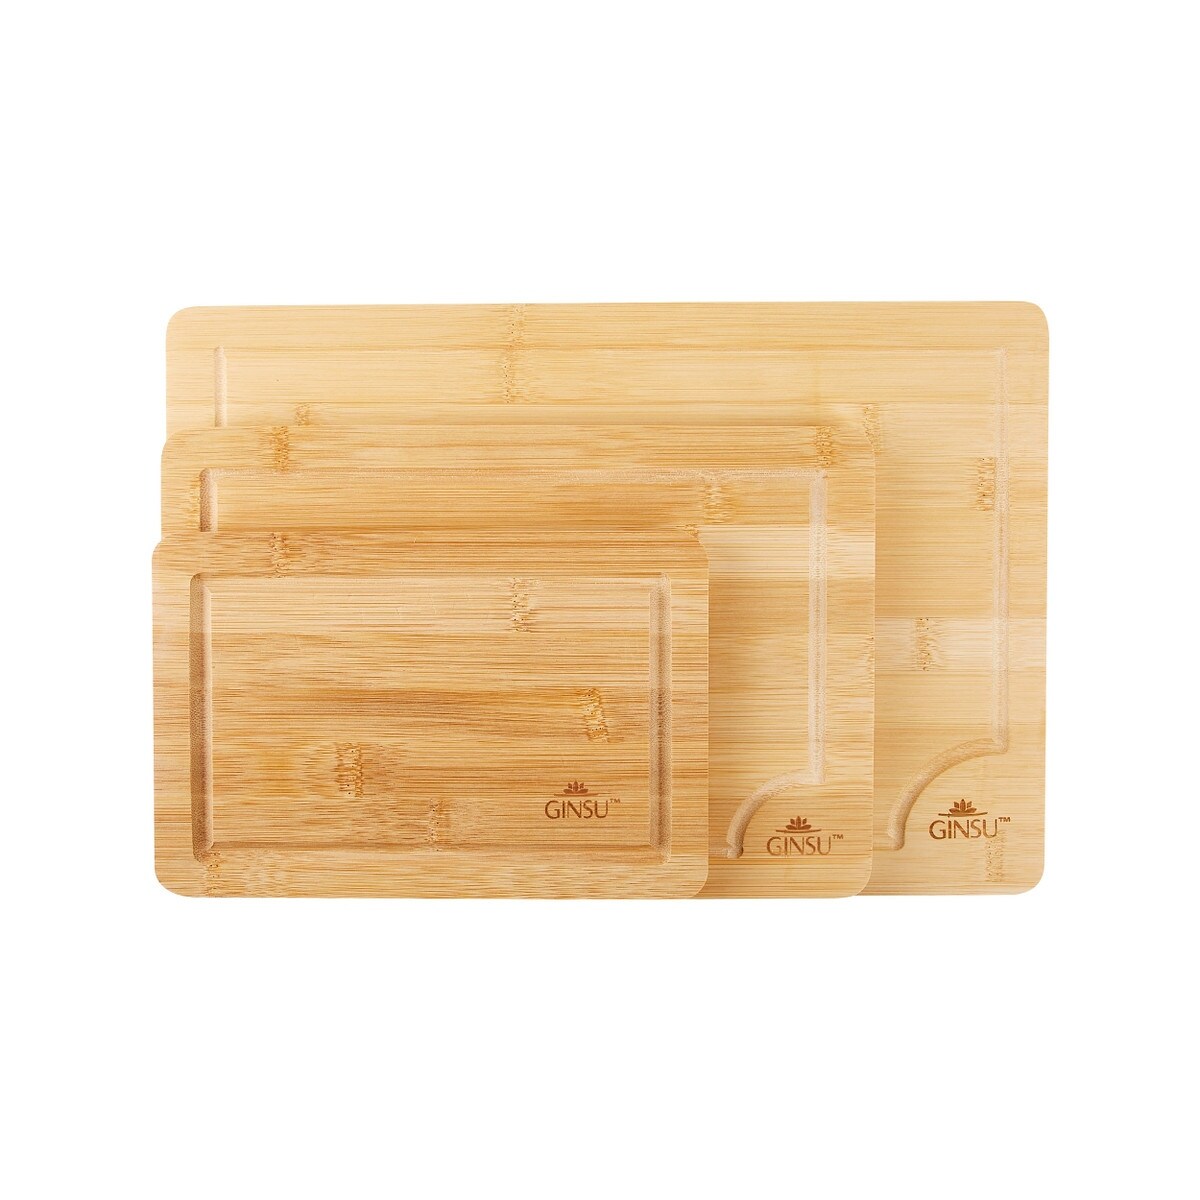 https://ak1.ostkcdn.com/images/products/is/images/direct/671ad086baa3870e500d4c9471fcd84d182bc7f6/Ginsu-Eco-Friendly-Bamboo-Cutting-Board-%28GNZ-2064X%29.jpg